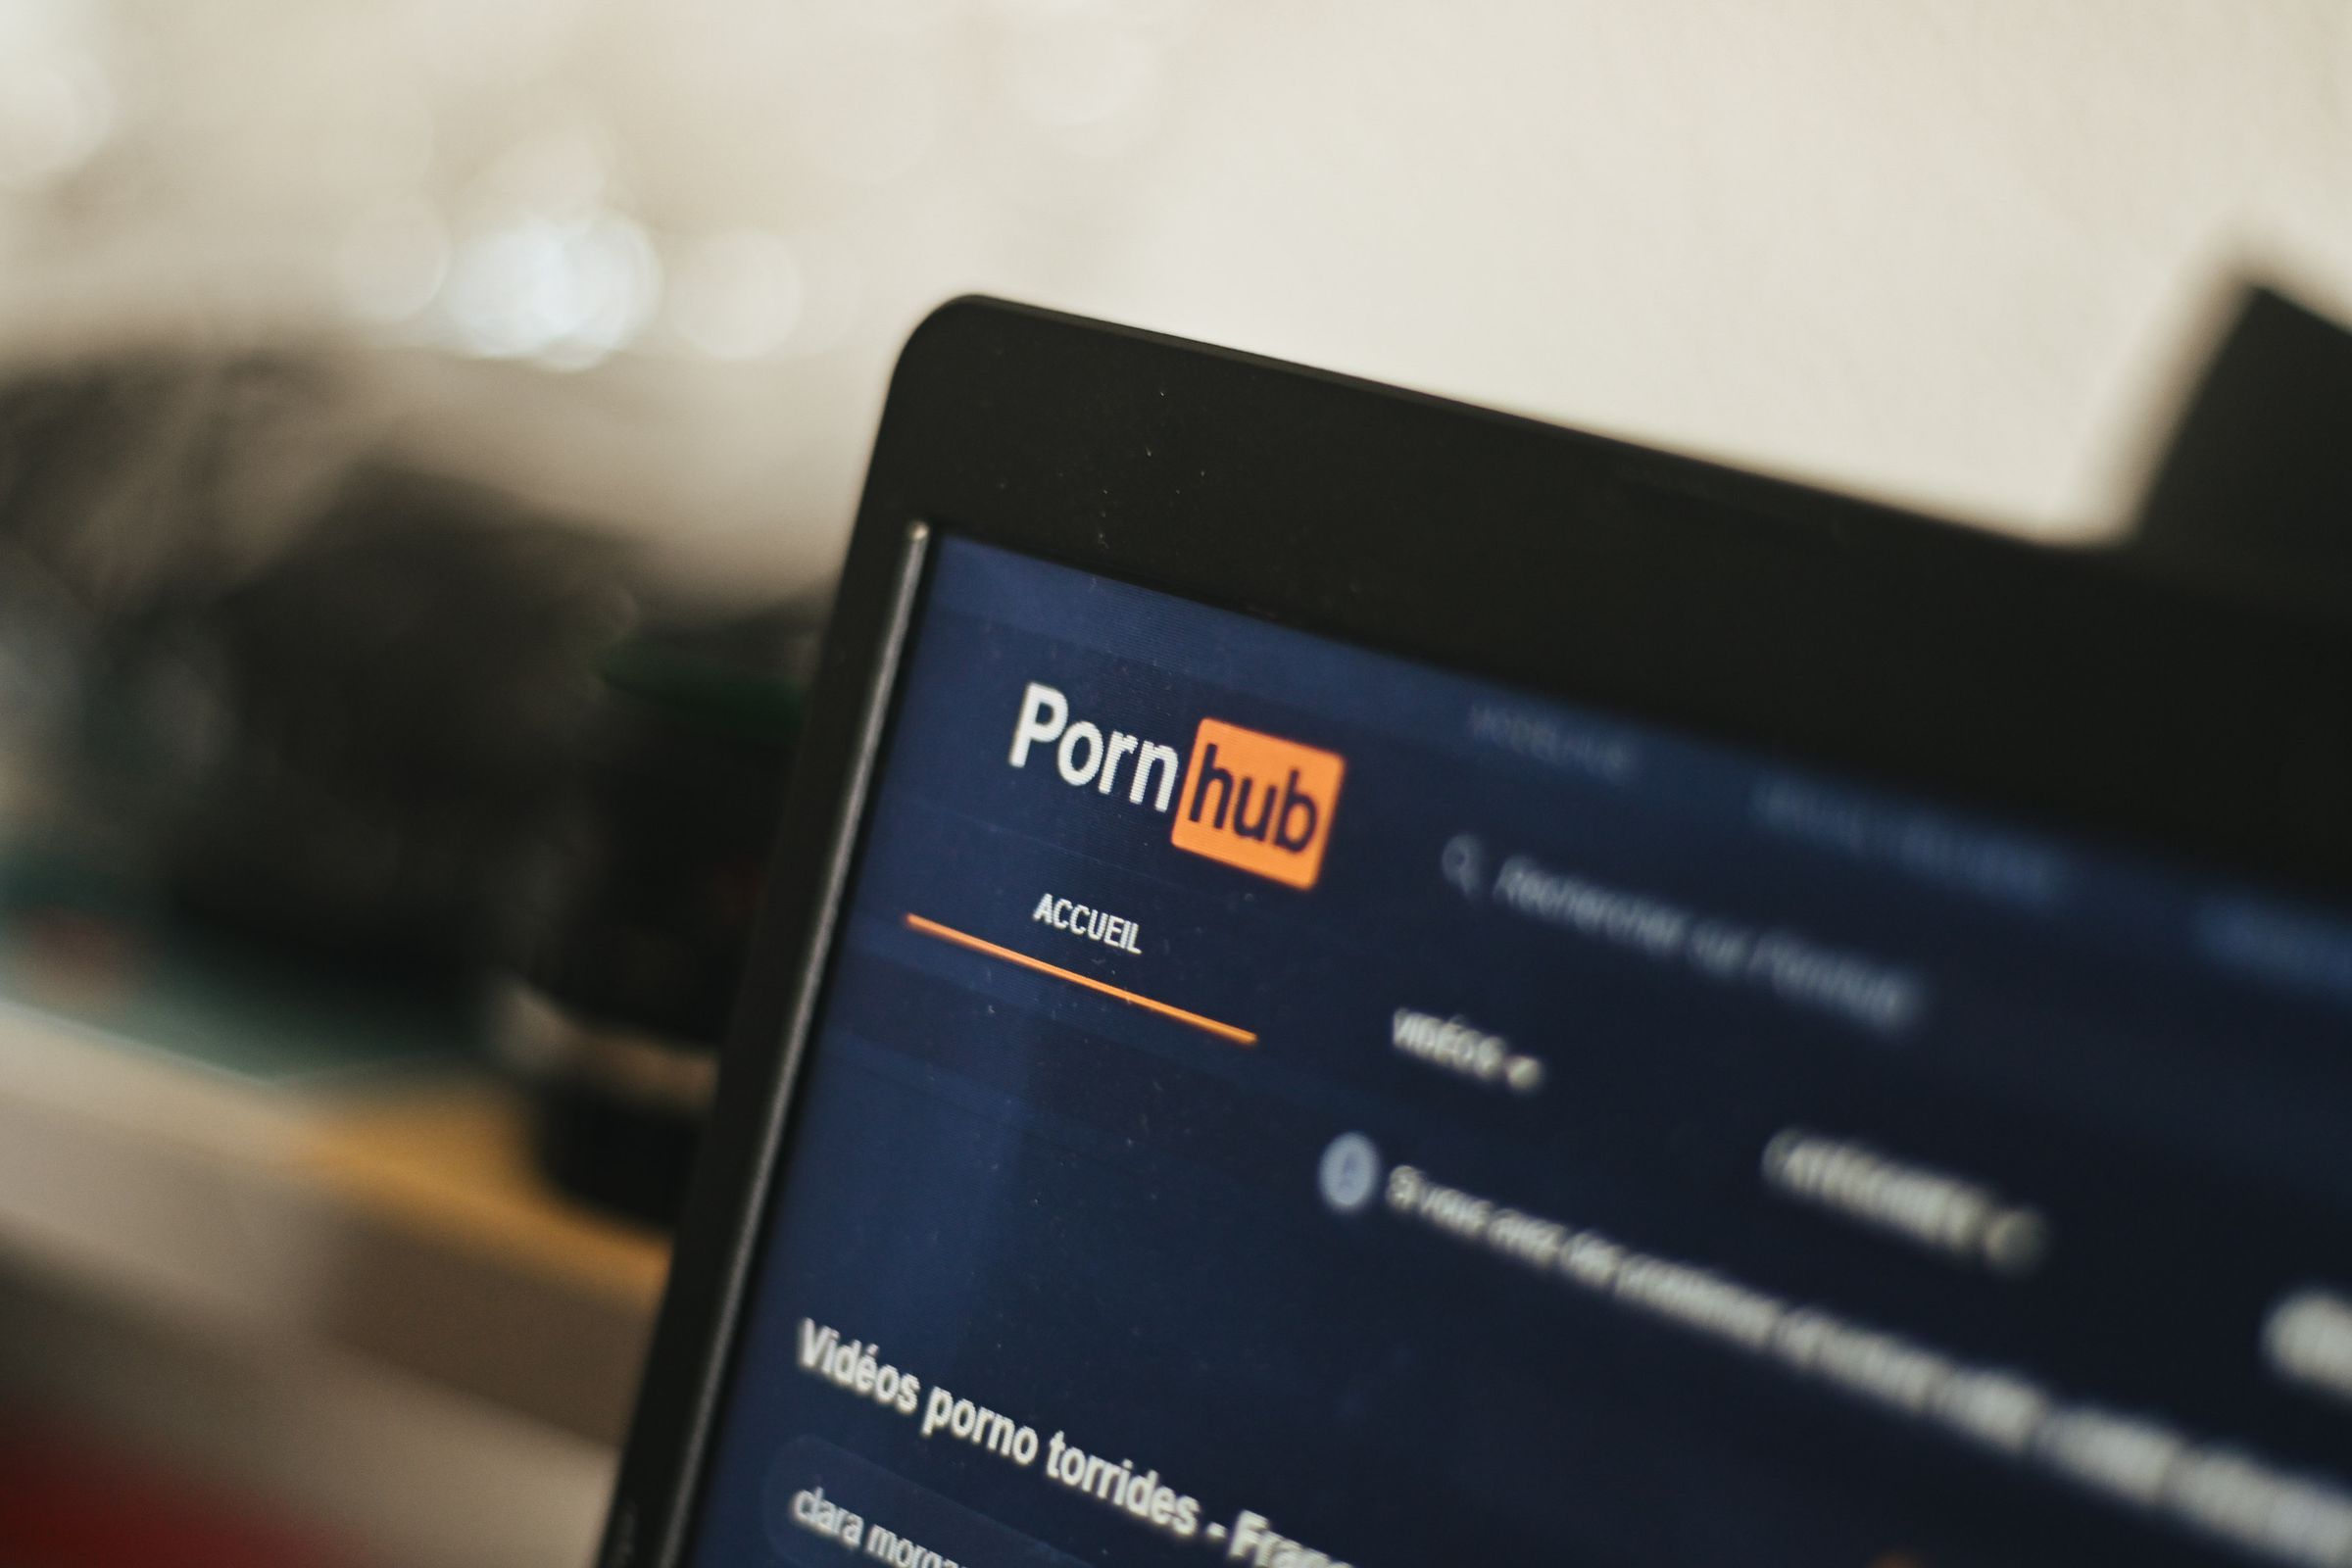 An image showing the Pornhub logo in a web browser